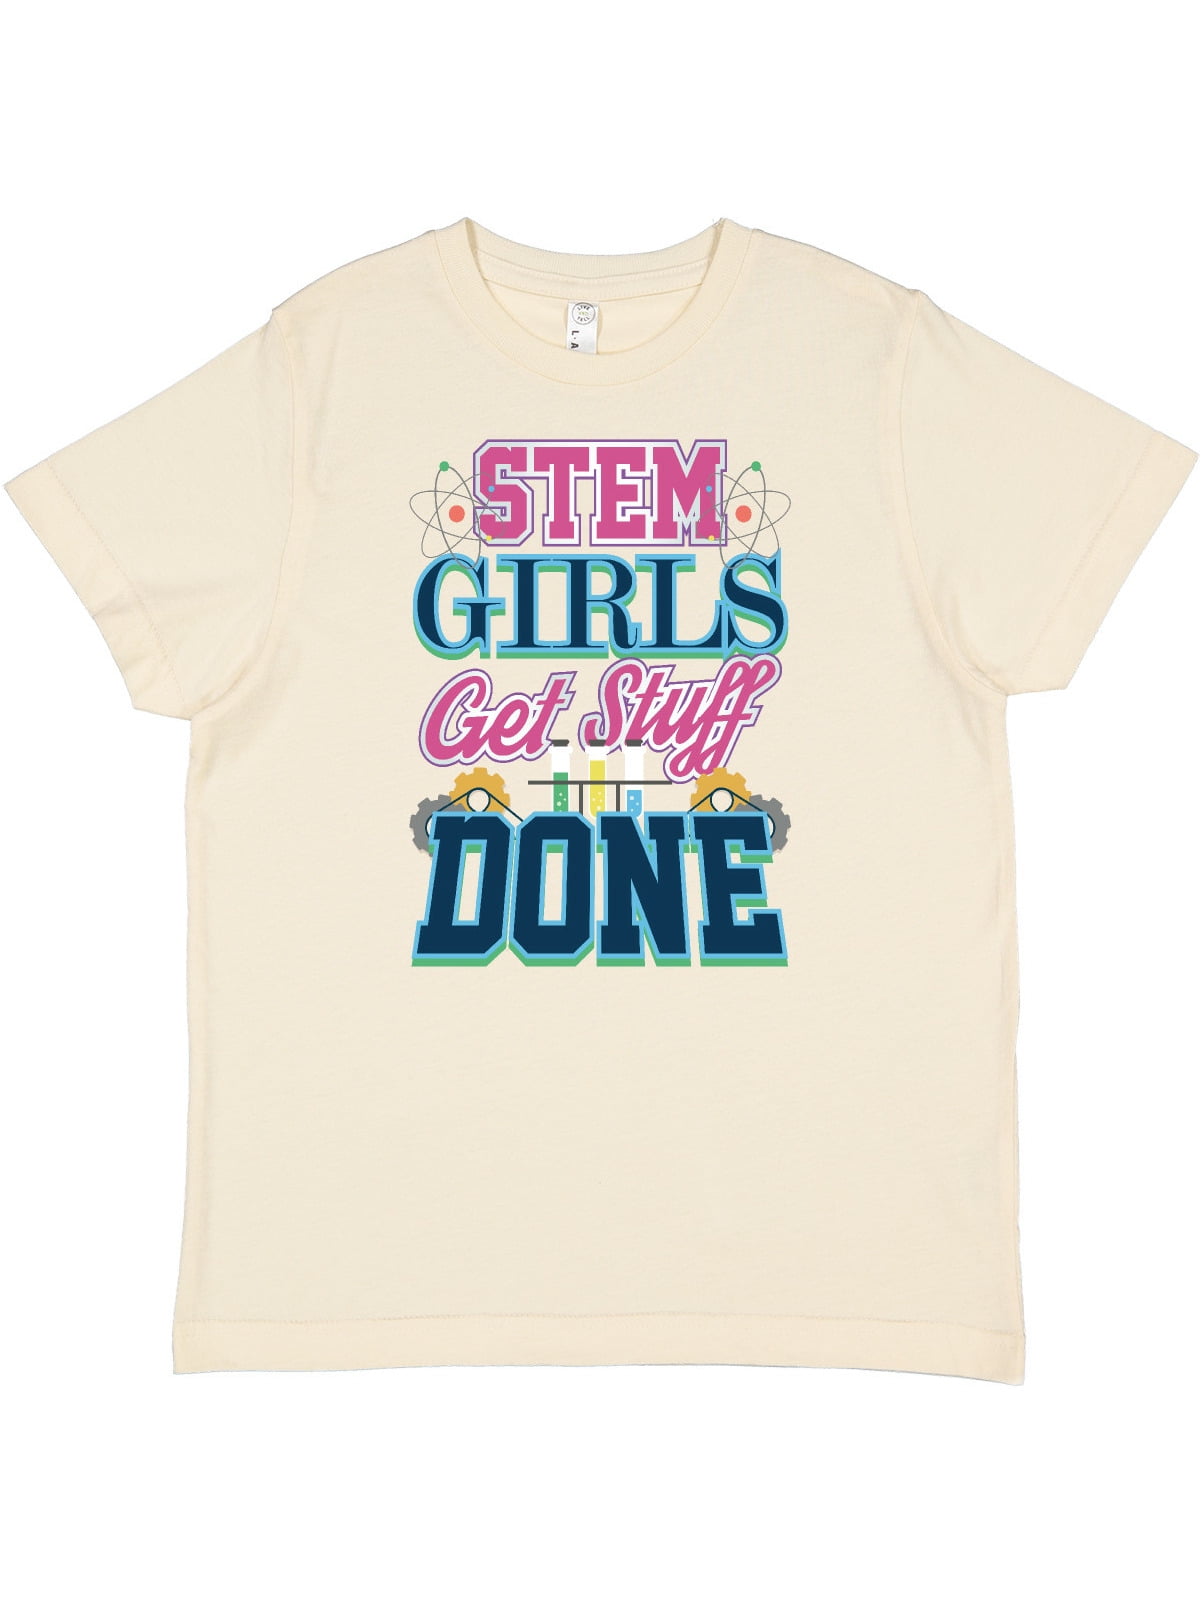 Youth Science Girl Short Sleeve T Shirt Top Blouse